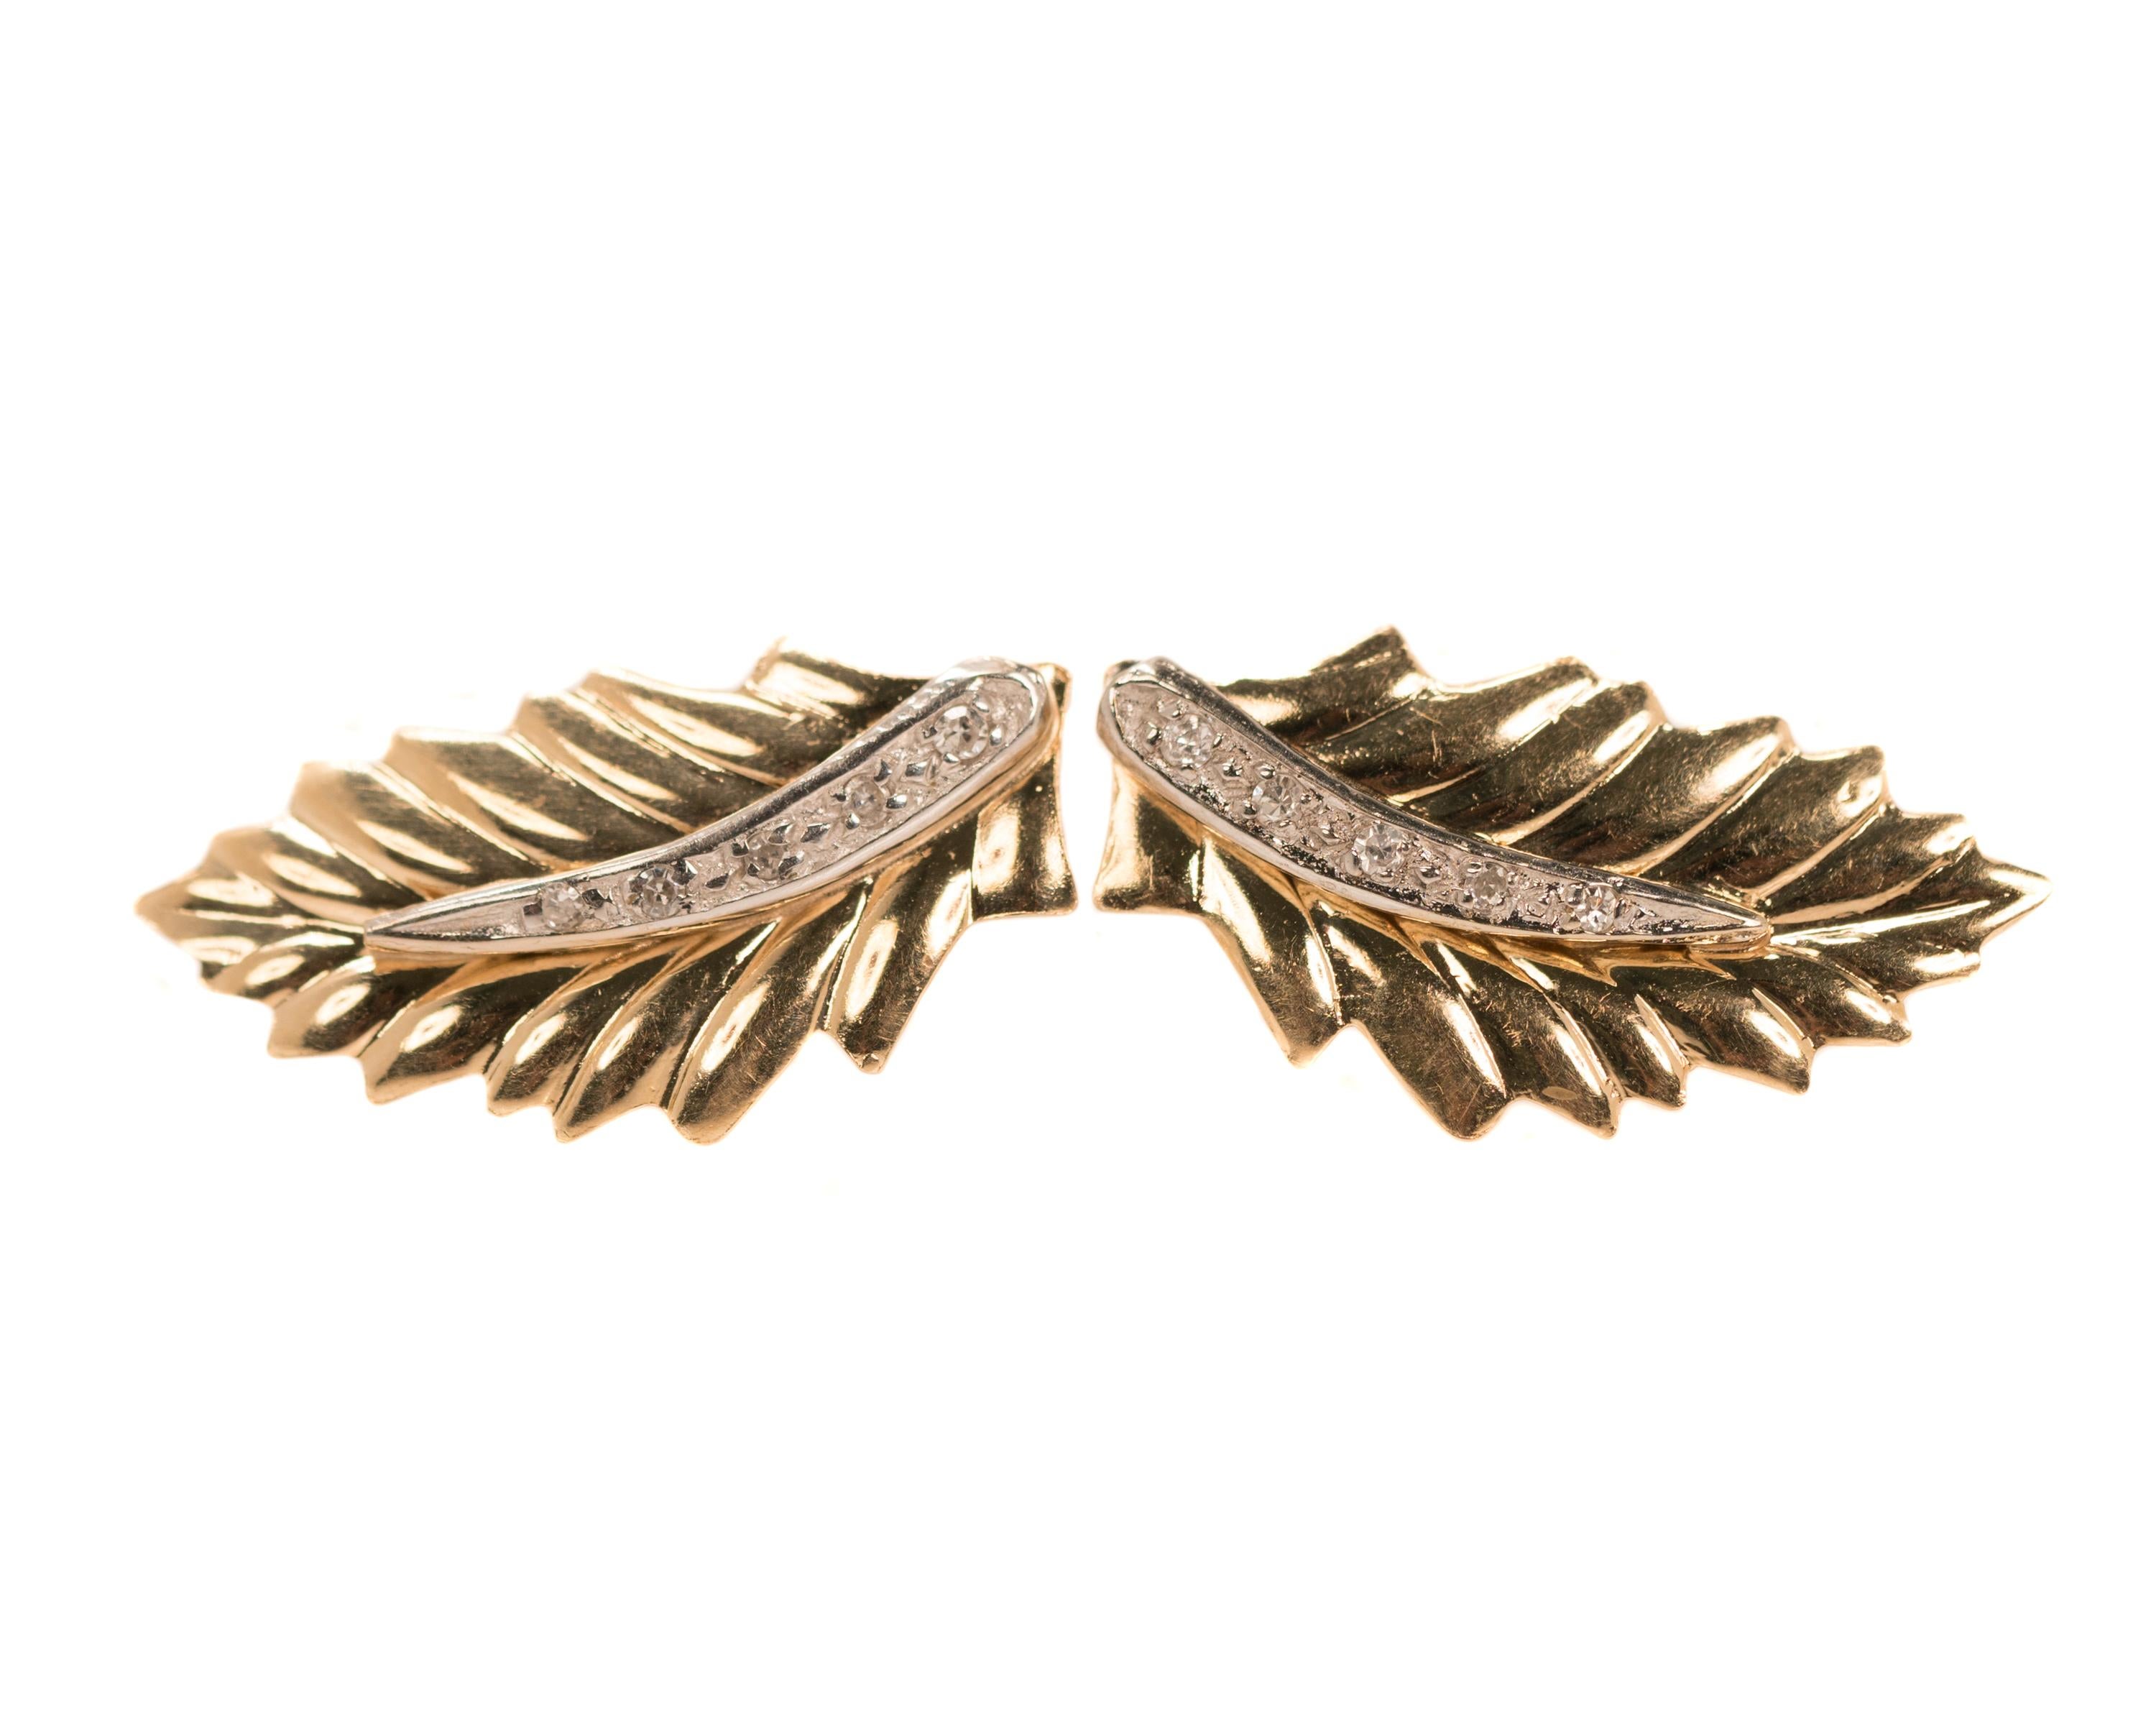 1950s Retro Feather, Leaf Earrings - 14 Karat Yellow Gold, White Gold, Diamonds

Features:
Elegant Leaf or Feather Design
14 Karat Yellow Gold Earring, Post and Back
14 Karat White Gold and Diamond Accent Center Stalk
Friction push back